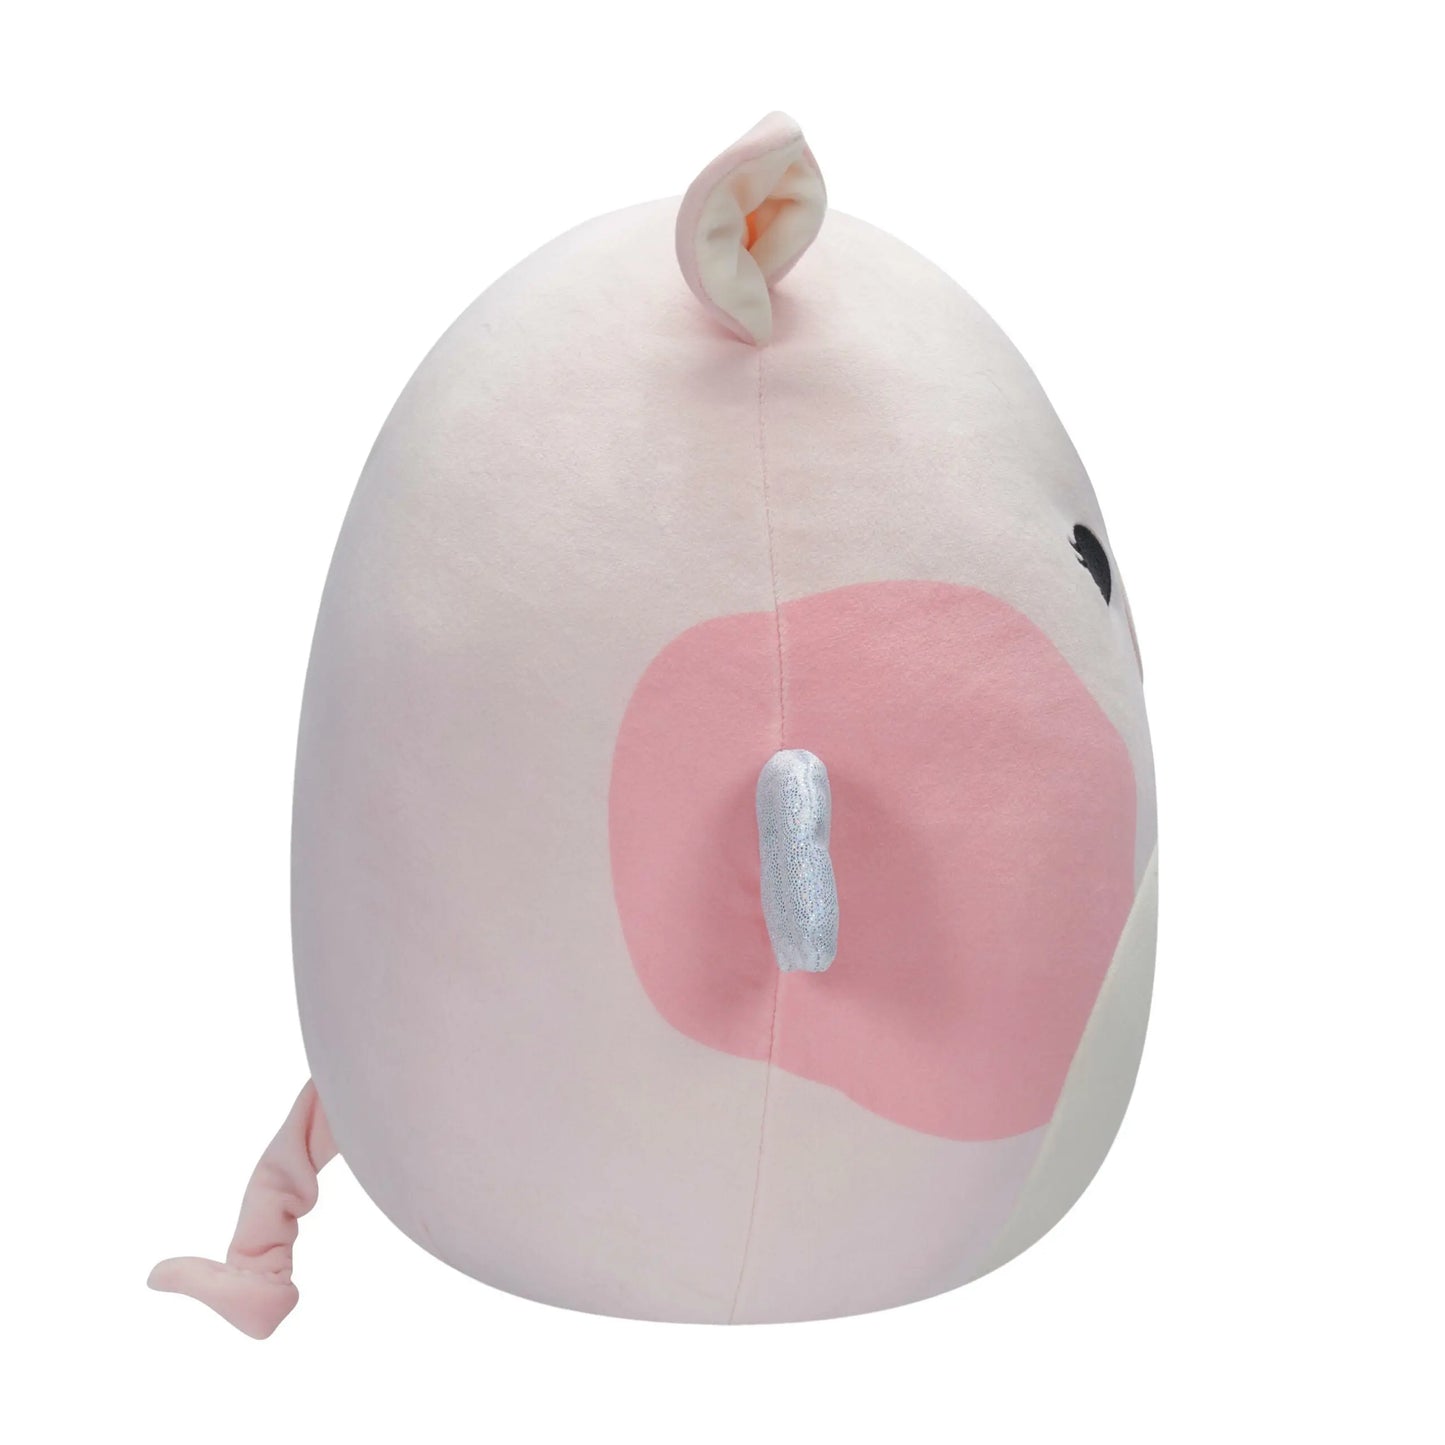 SQUISHMALLOW PEETY THE PINK SPOTTED PIG PIG 30 CM-Squishmallow-SweMallow